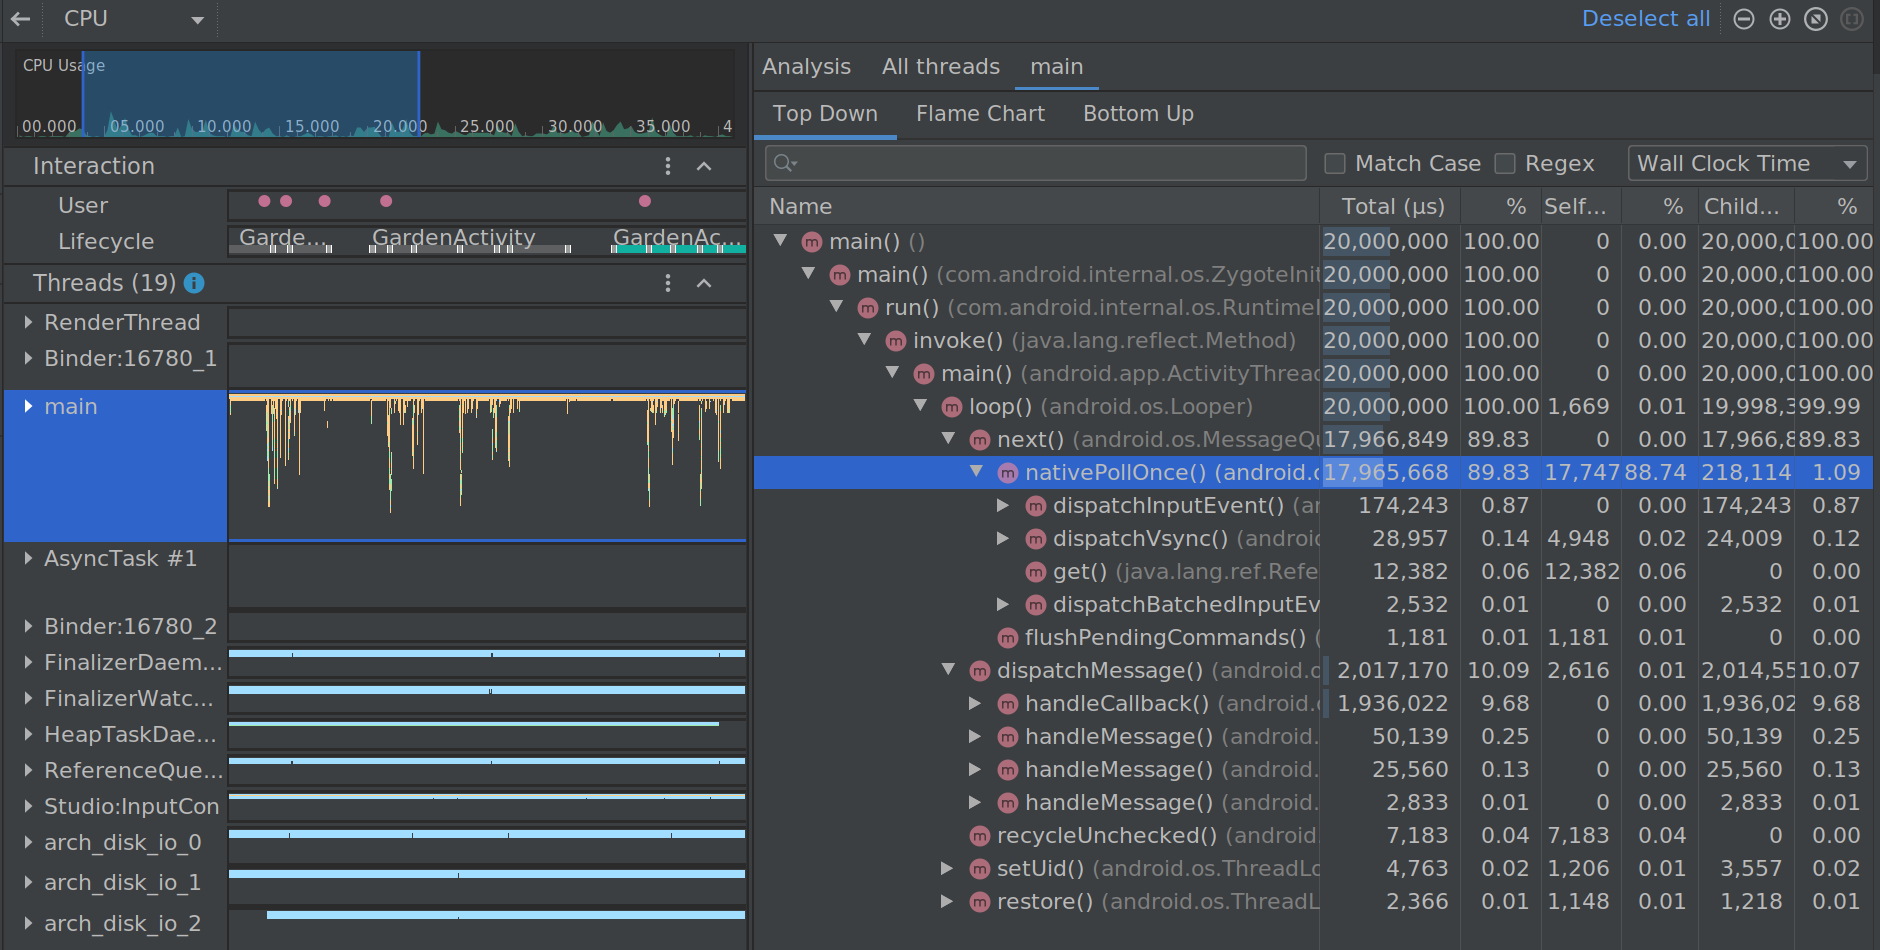 gradle sync failed in android studio 3.0.1